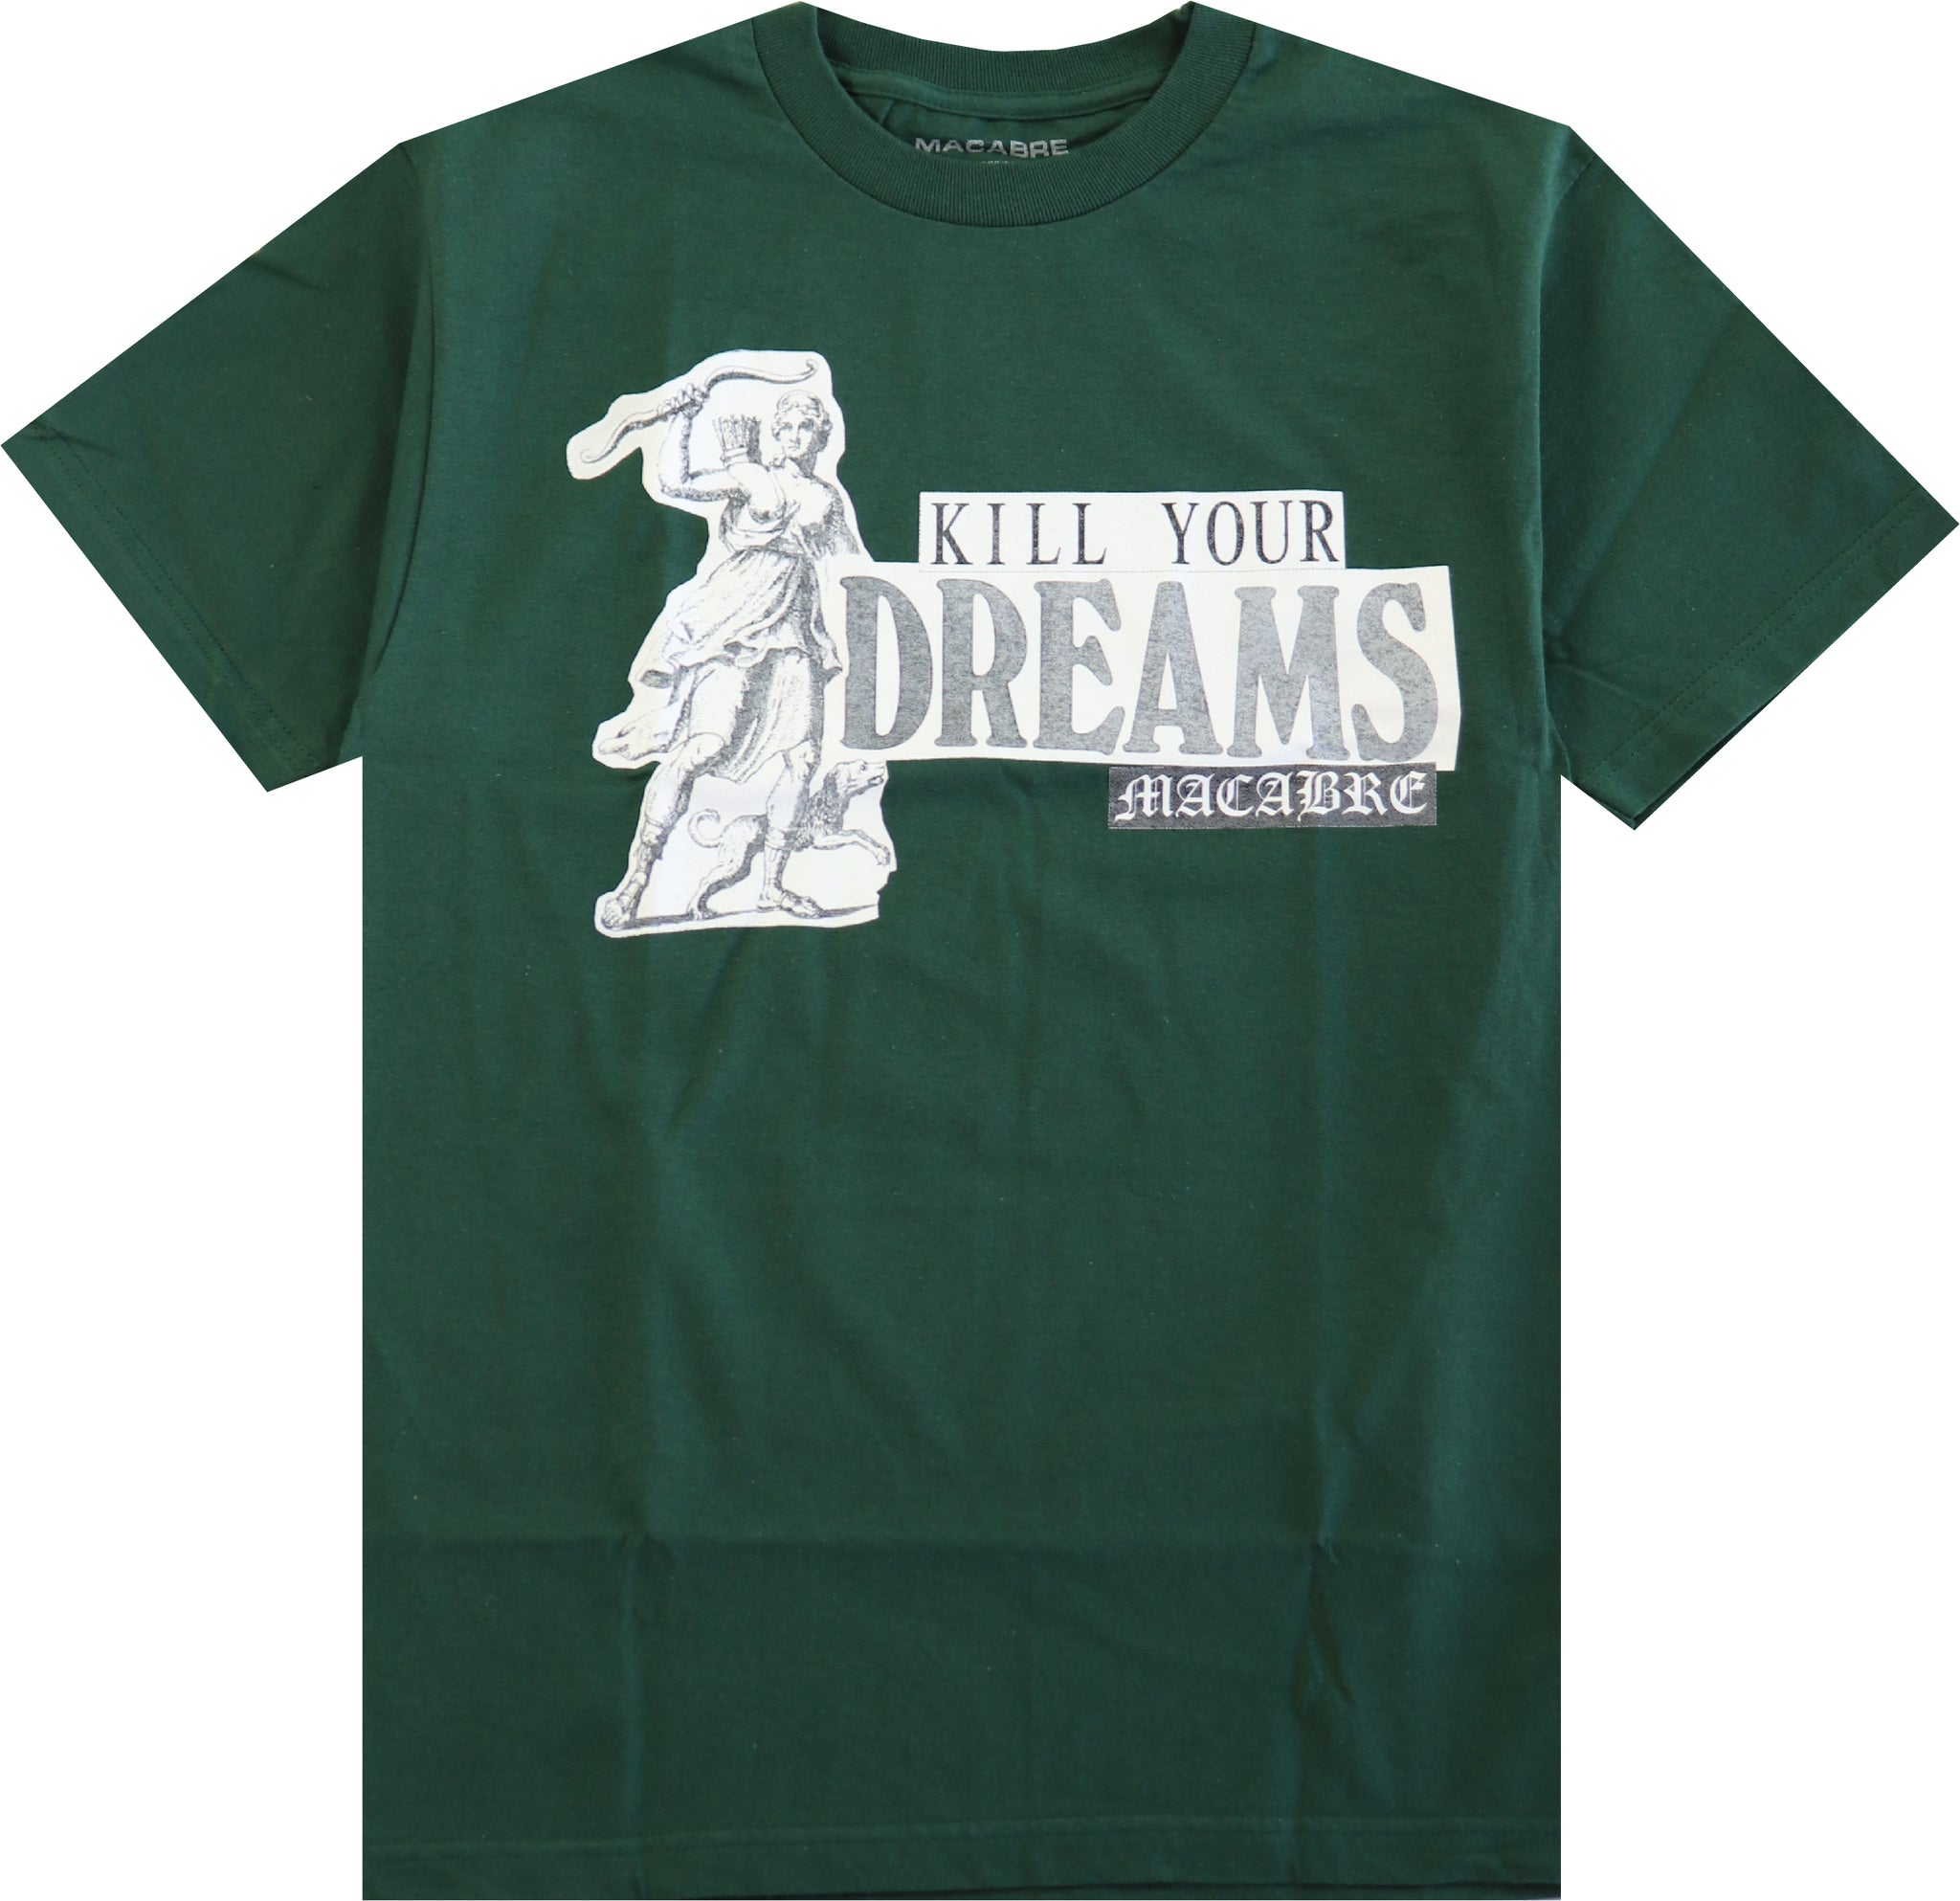 KILL YOUR DREAMS T-SHIRT (FOREST)